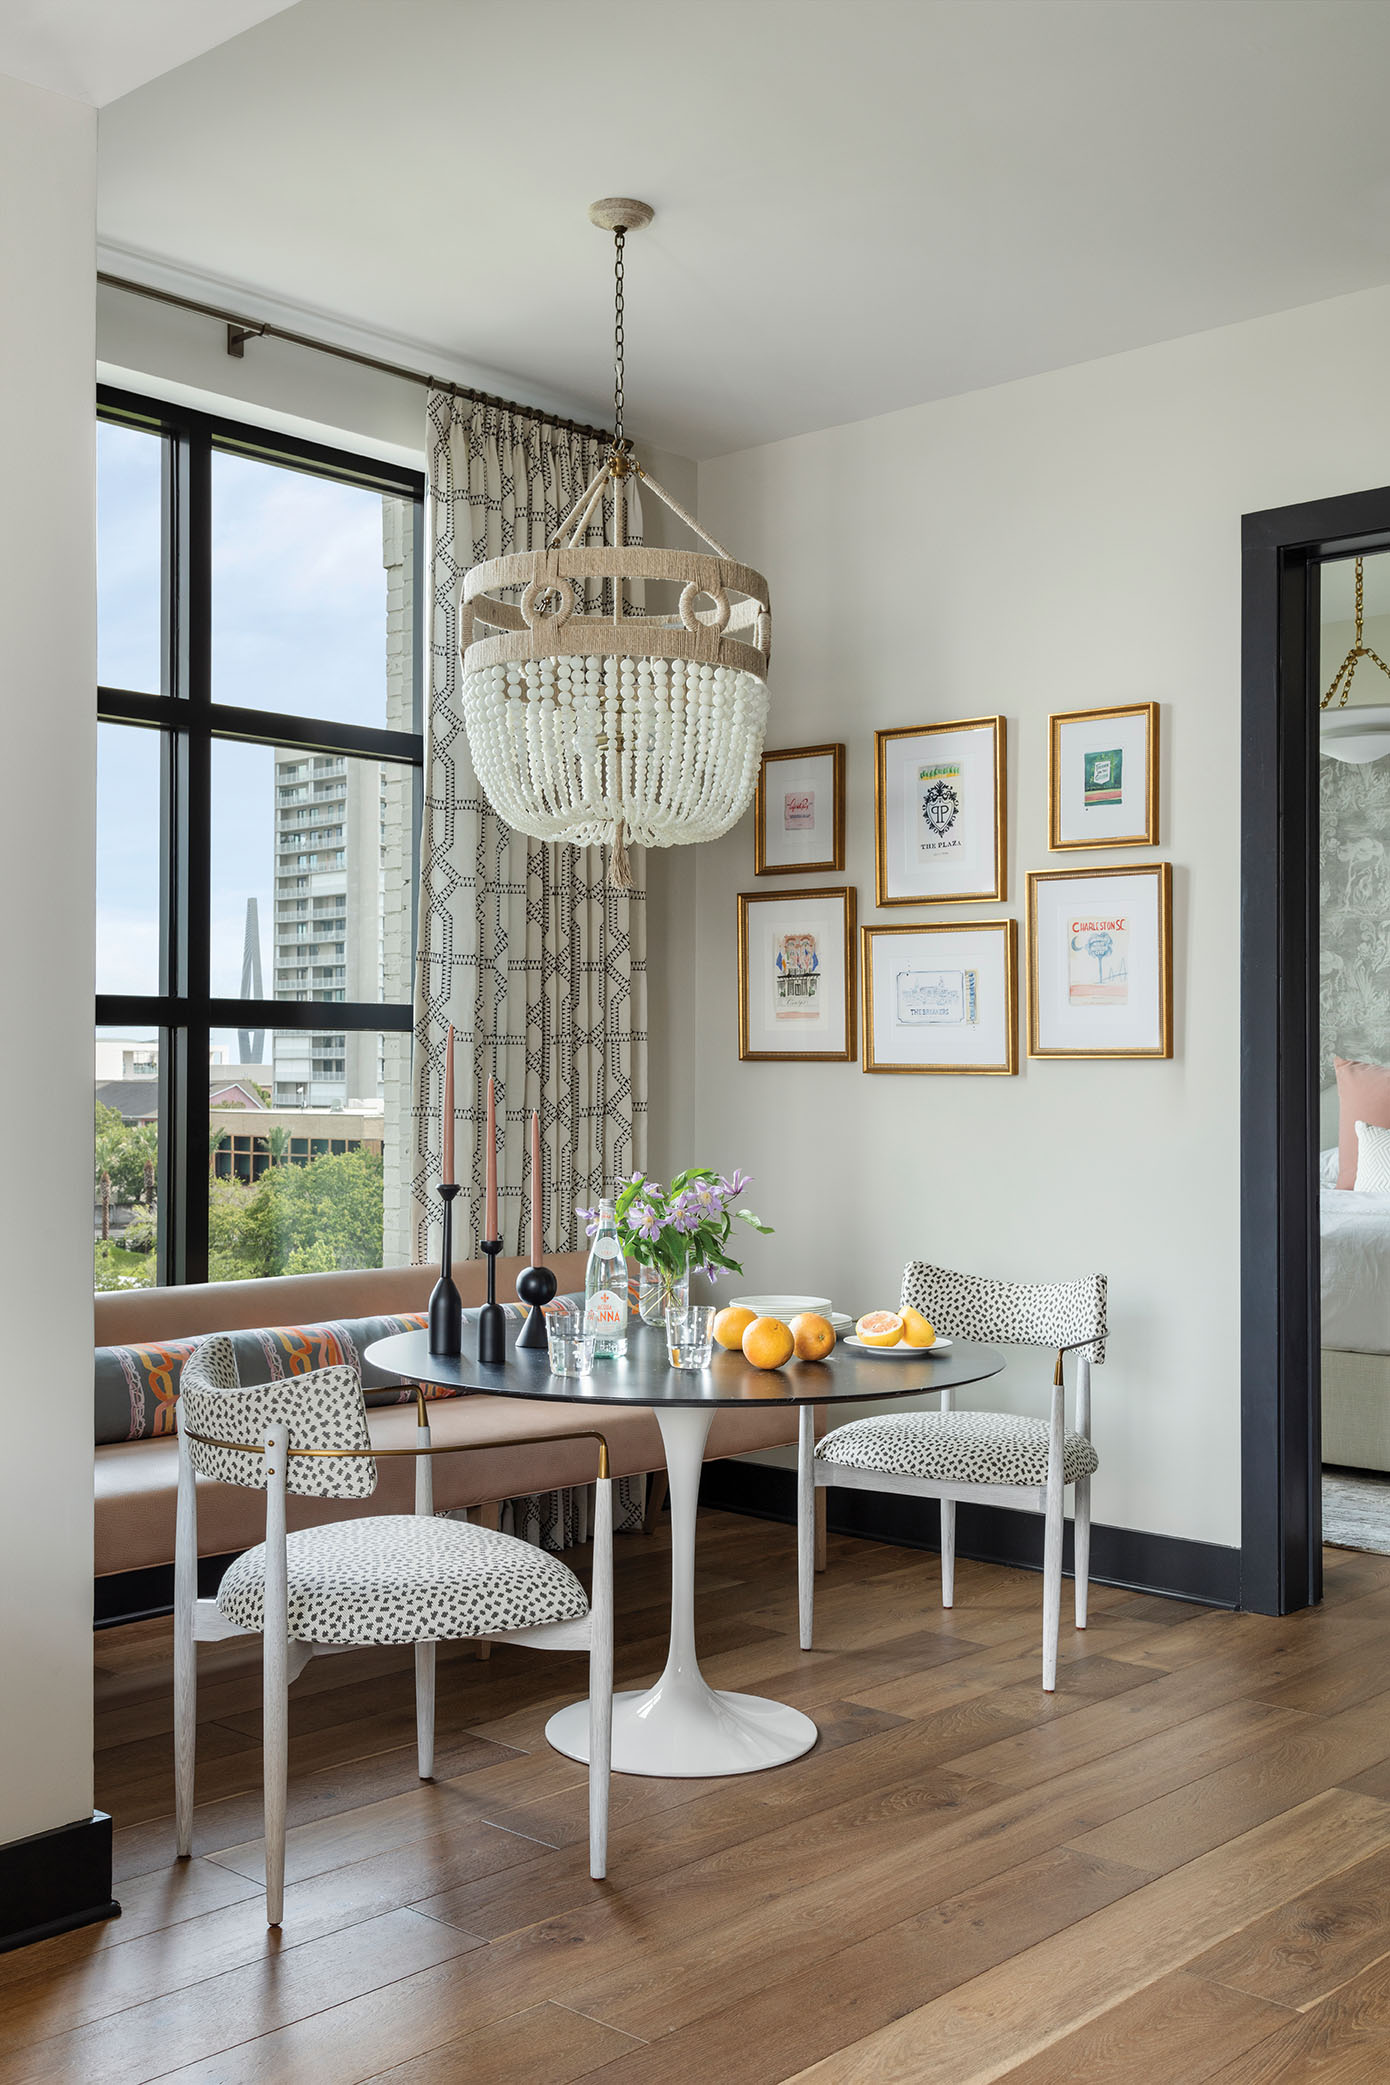 breakfast with a view: The small dining nook offers views of the Ravenel in the distance. A fun chandelier from Ro Sham Beaux above a Knoll tulip table adds whimsy.